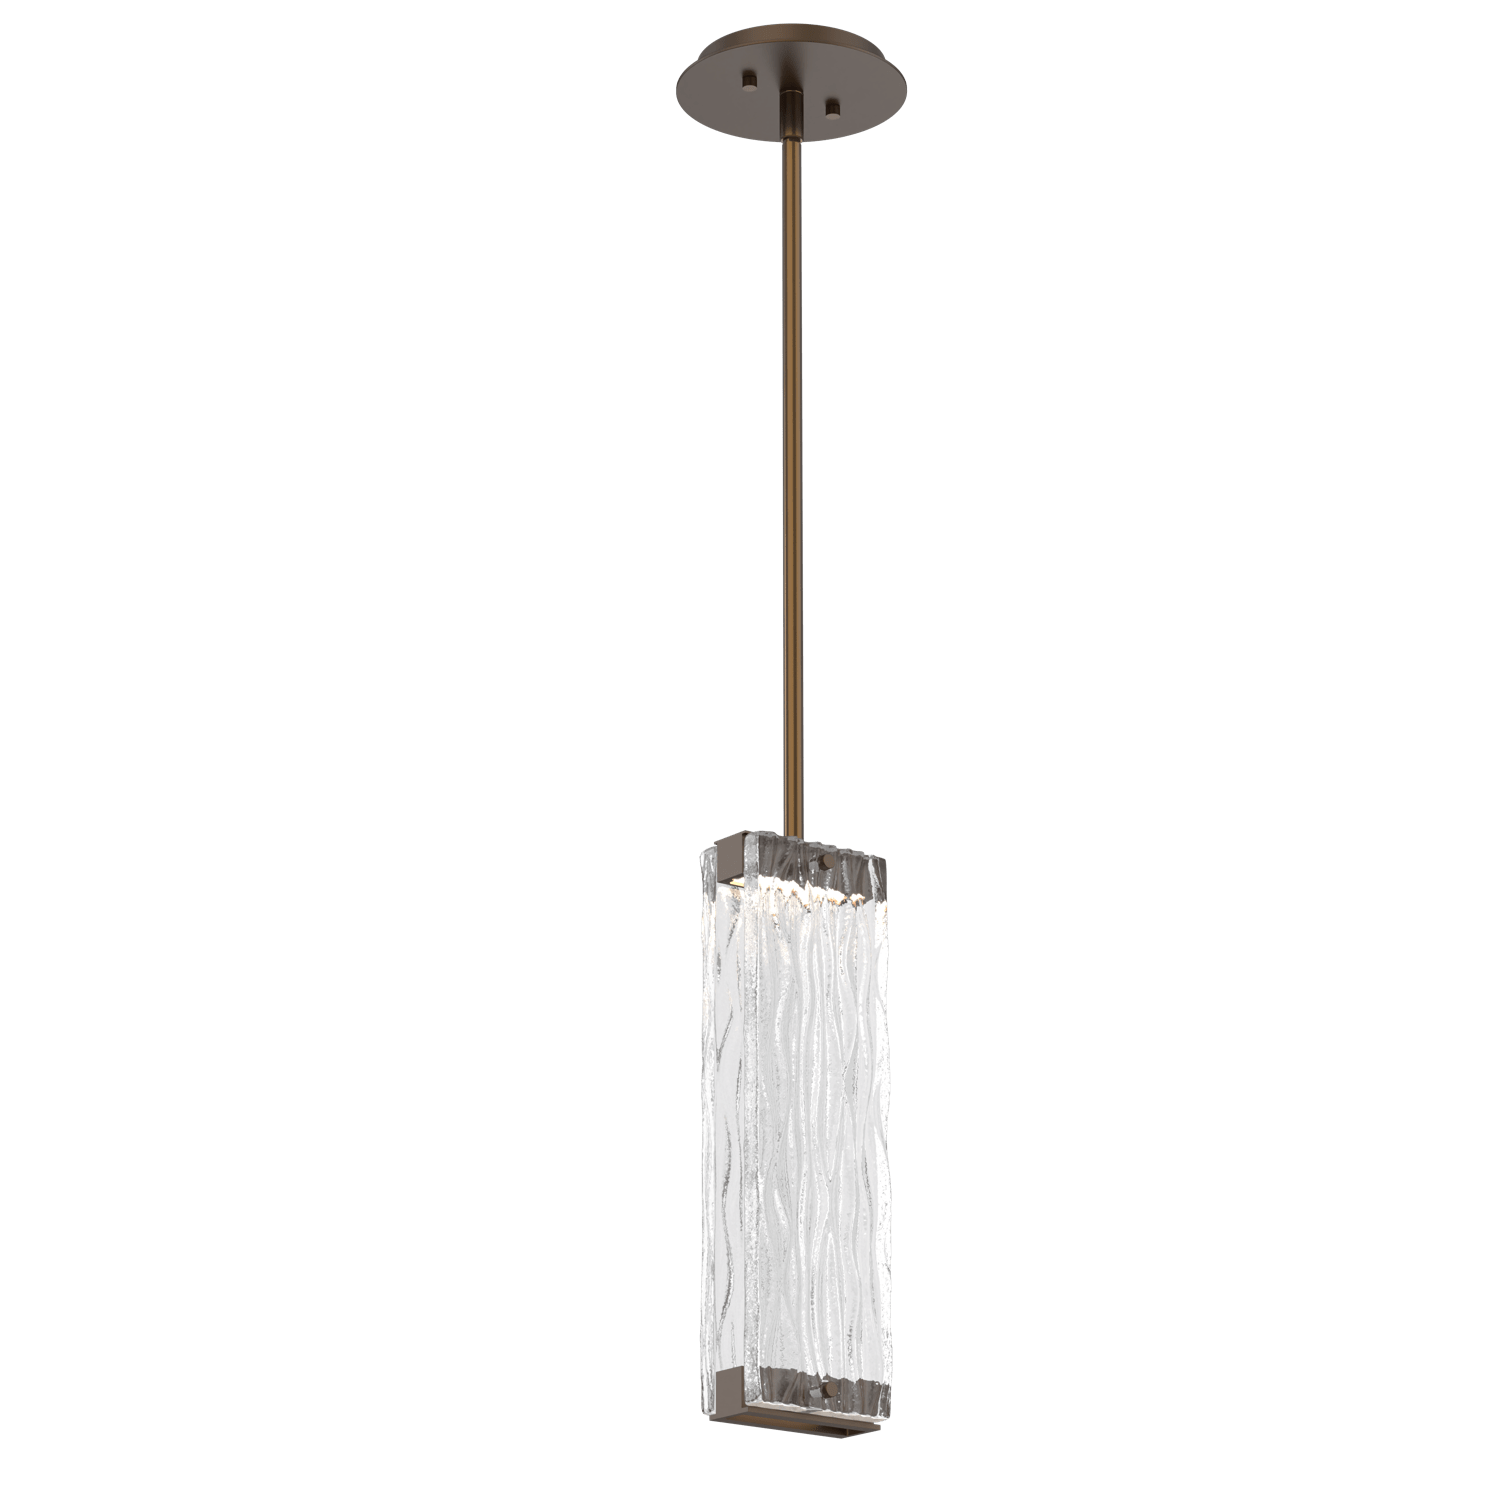 LAB0090-01-FB-TT-Hammerton-Studio-Tabulo-pendant-light-with-flat-bronze-finish-and-clear-tidal-cast-glass-shade-and-LED-lamping